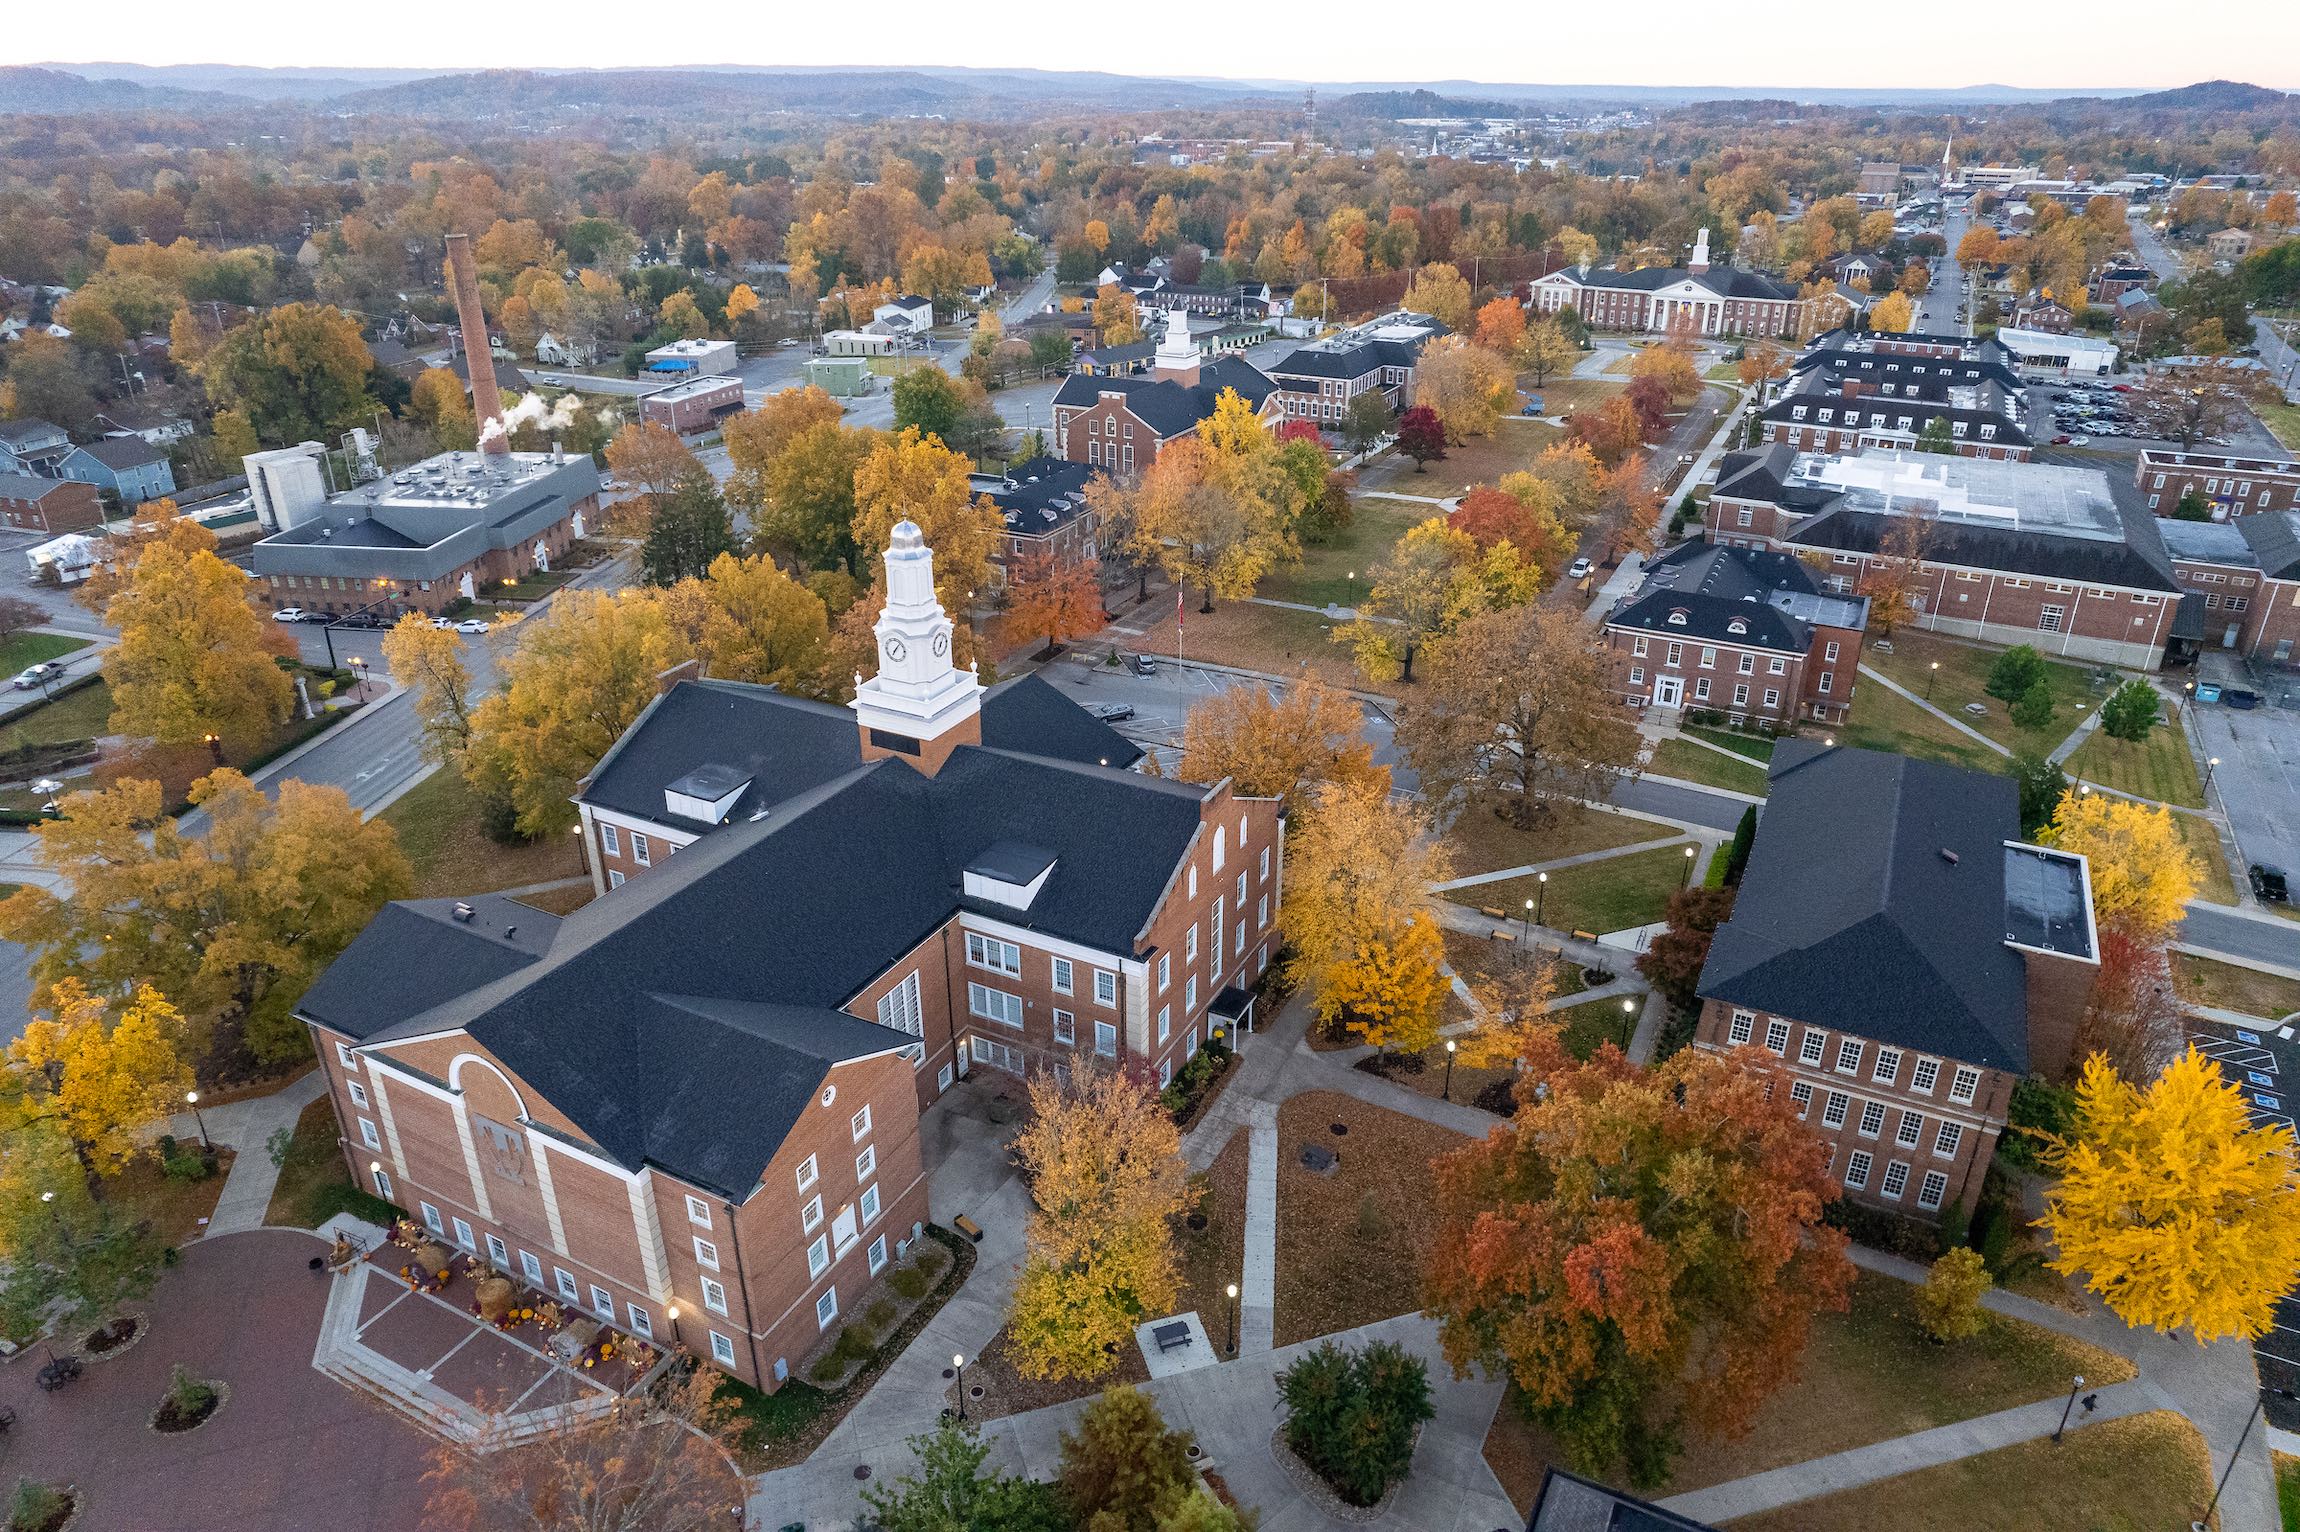 Aerial view of the Tennessee Tech campus with Derryberry Hall in the foreground.